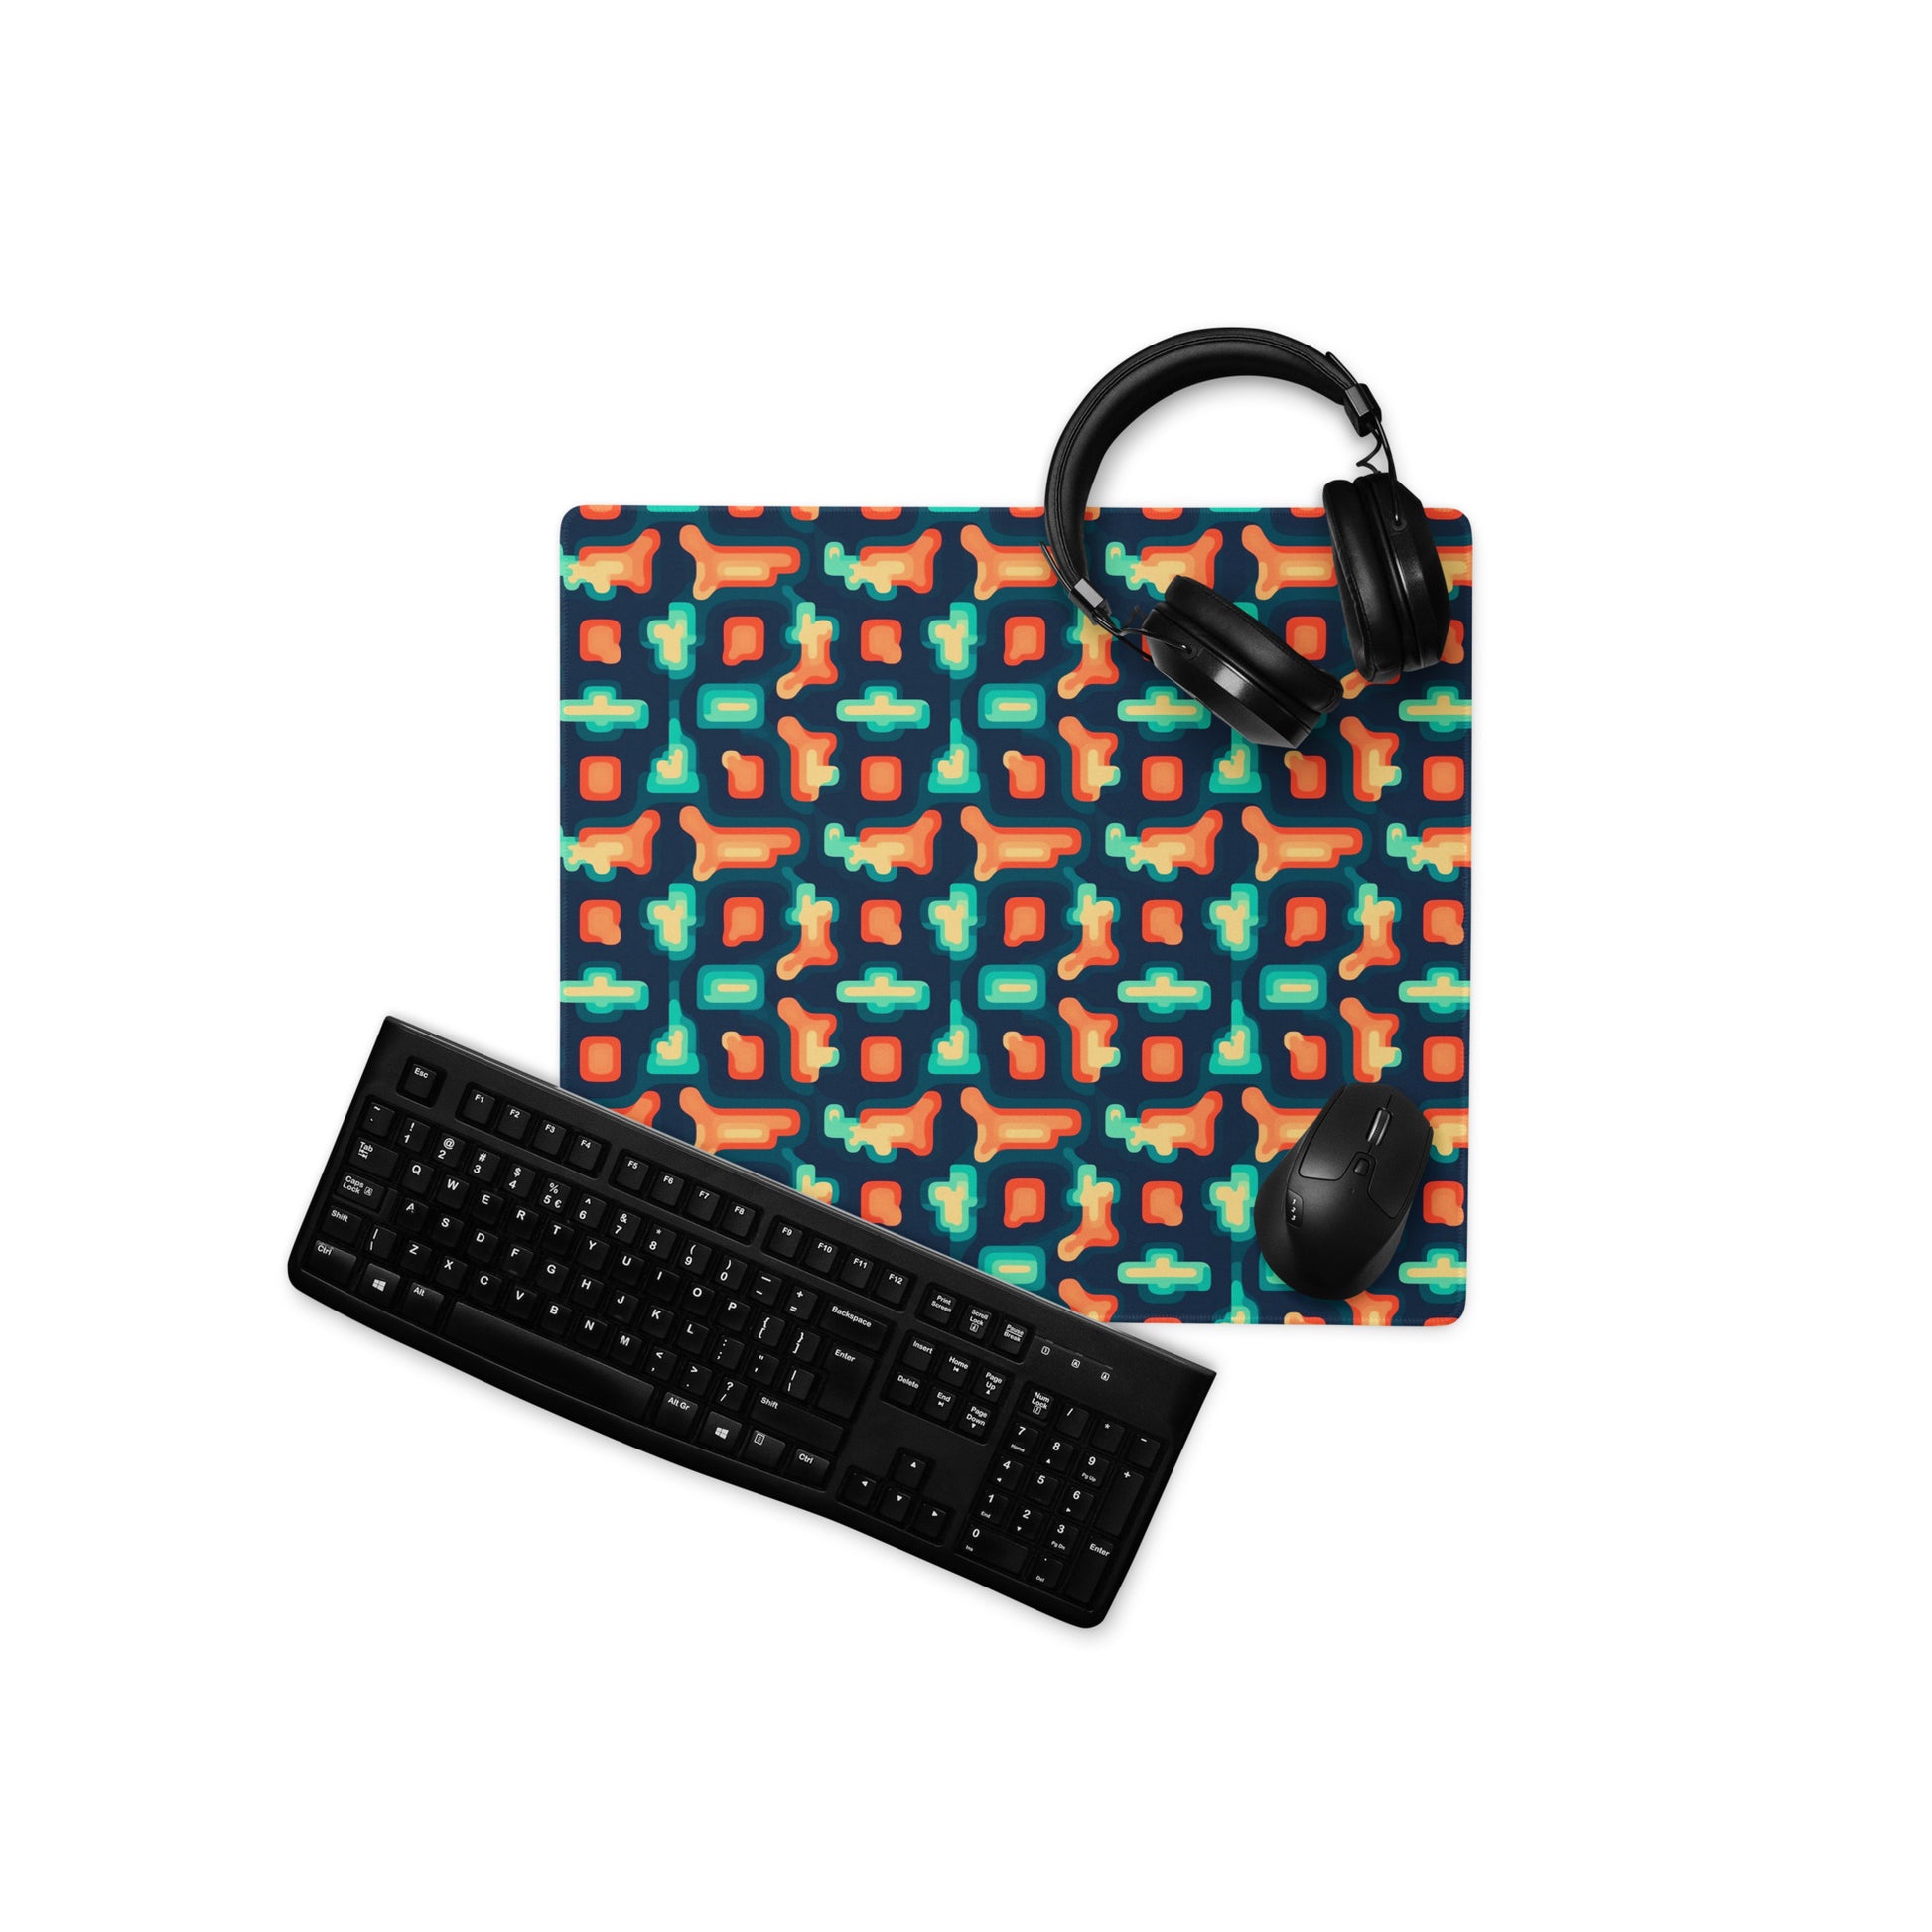 An 18" x 16" gaming desk pad with blue and orange puzzle pieces on a dark blue background. A keyboard, mouse, and headphones sit on it.